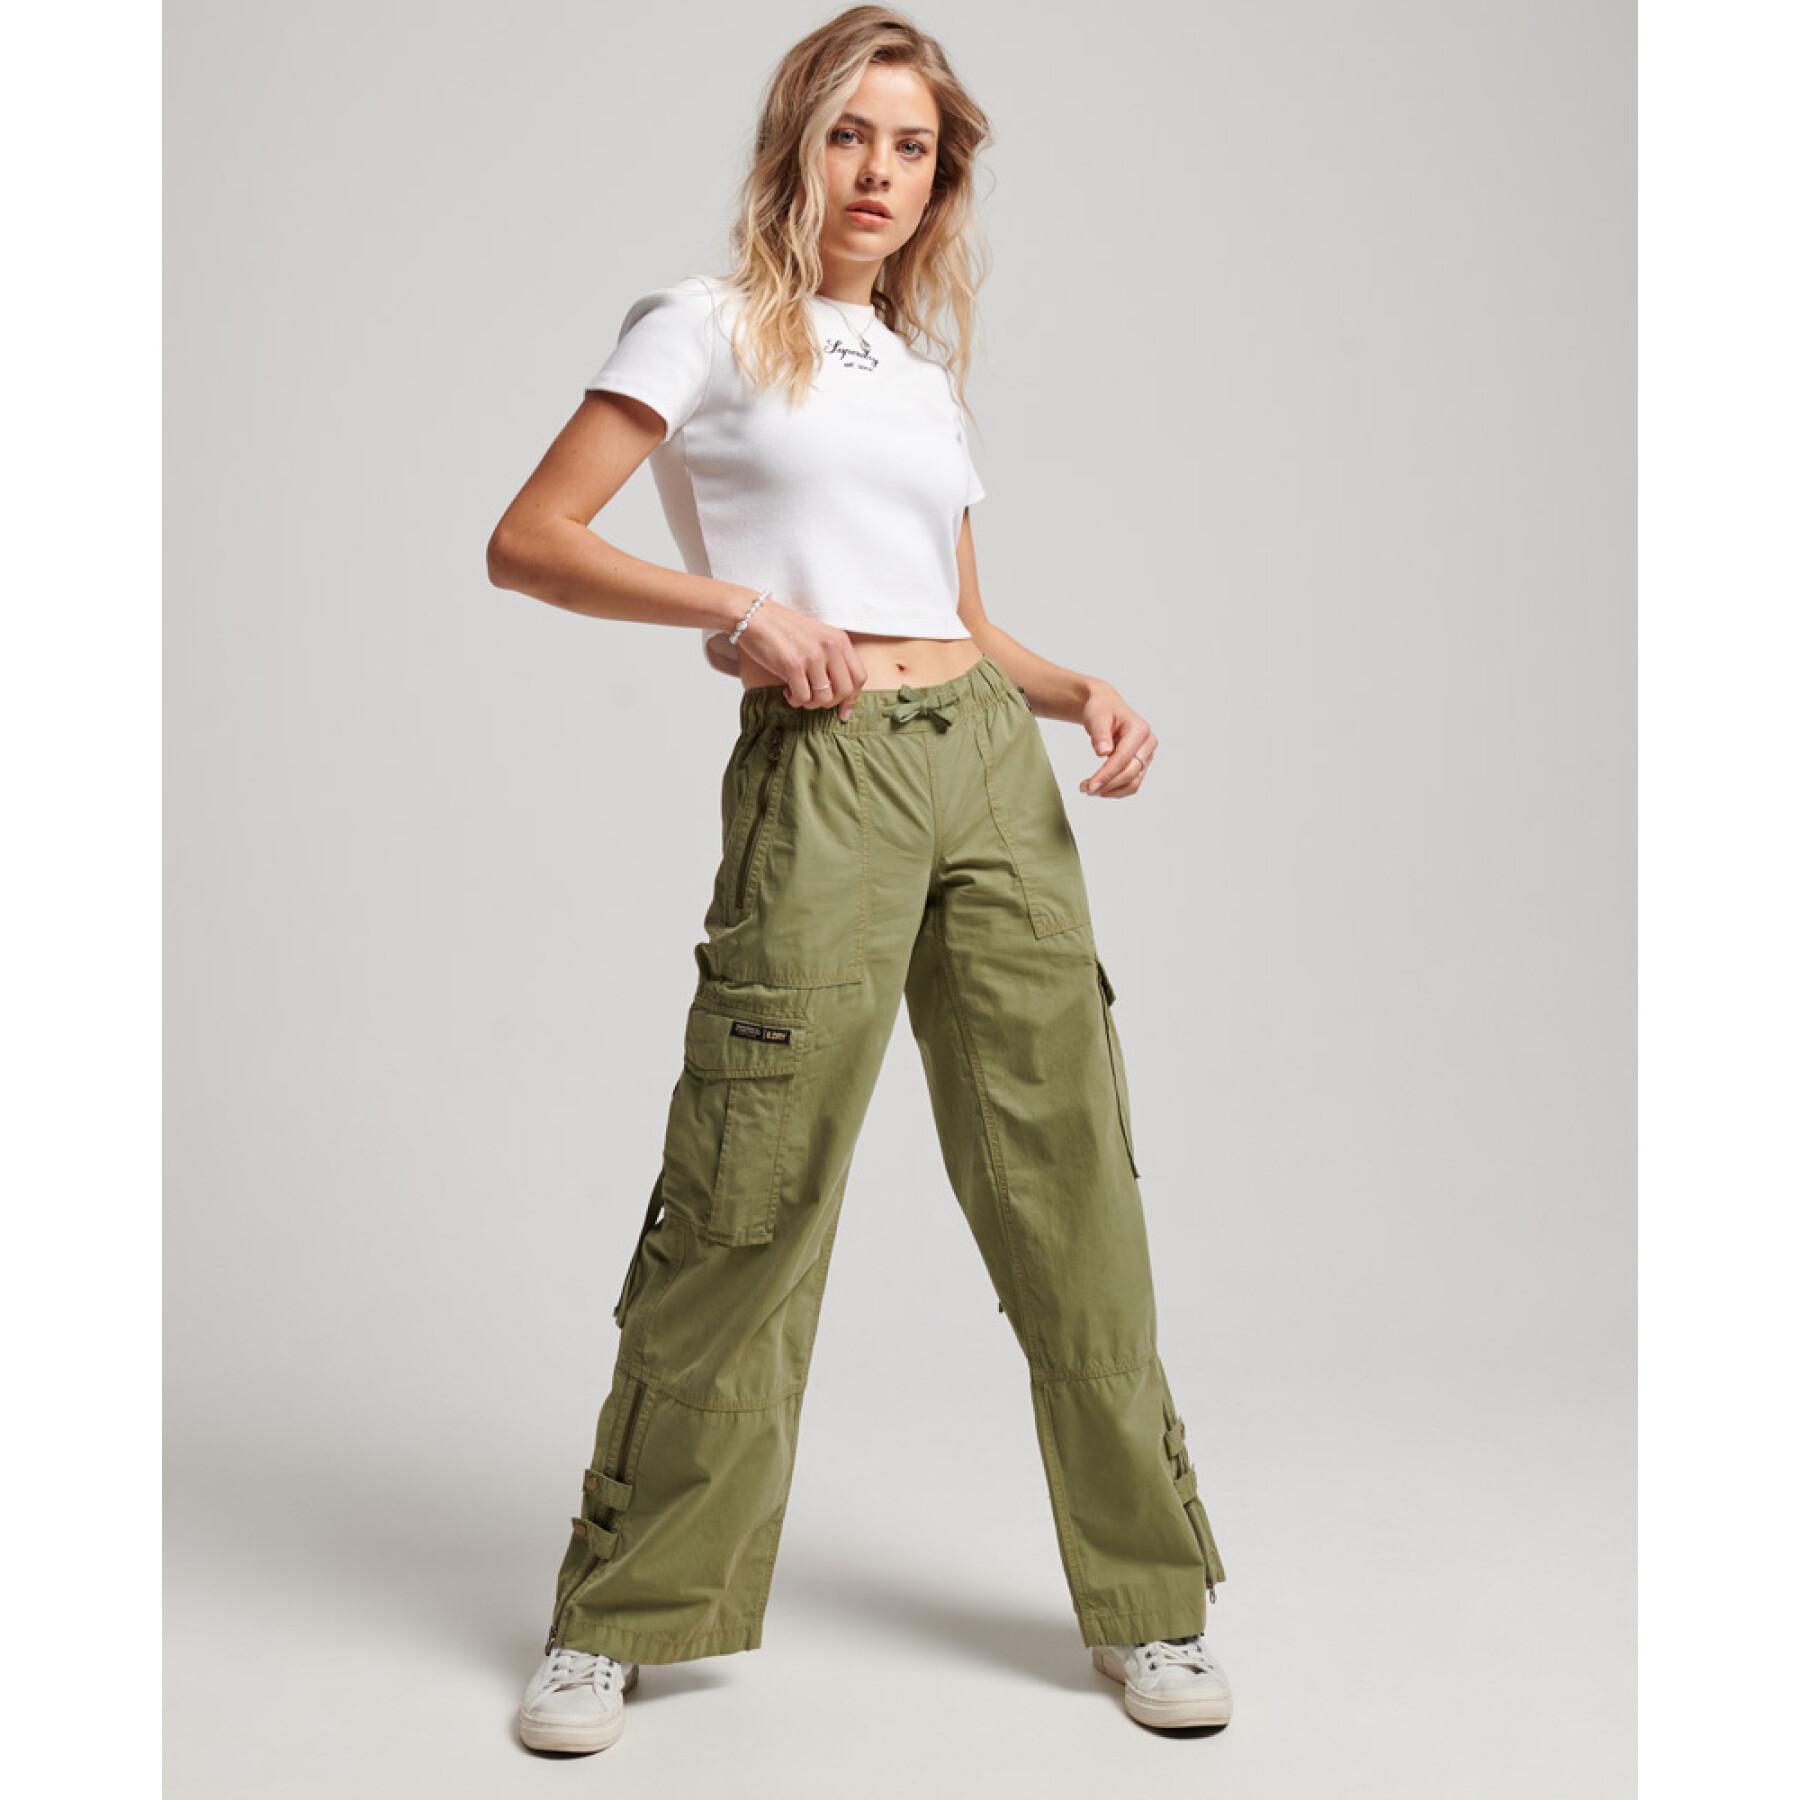 Superdry Baggy Parachute Pants, Olive Night at John Lewis & Partners